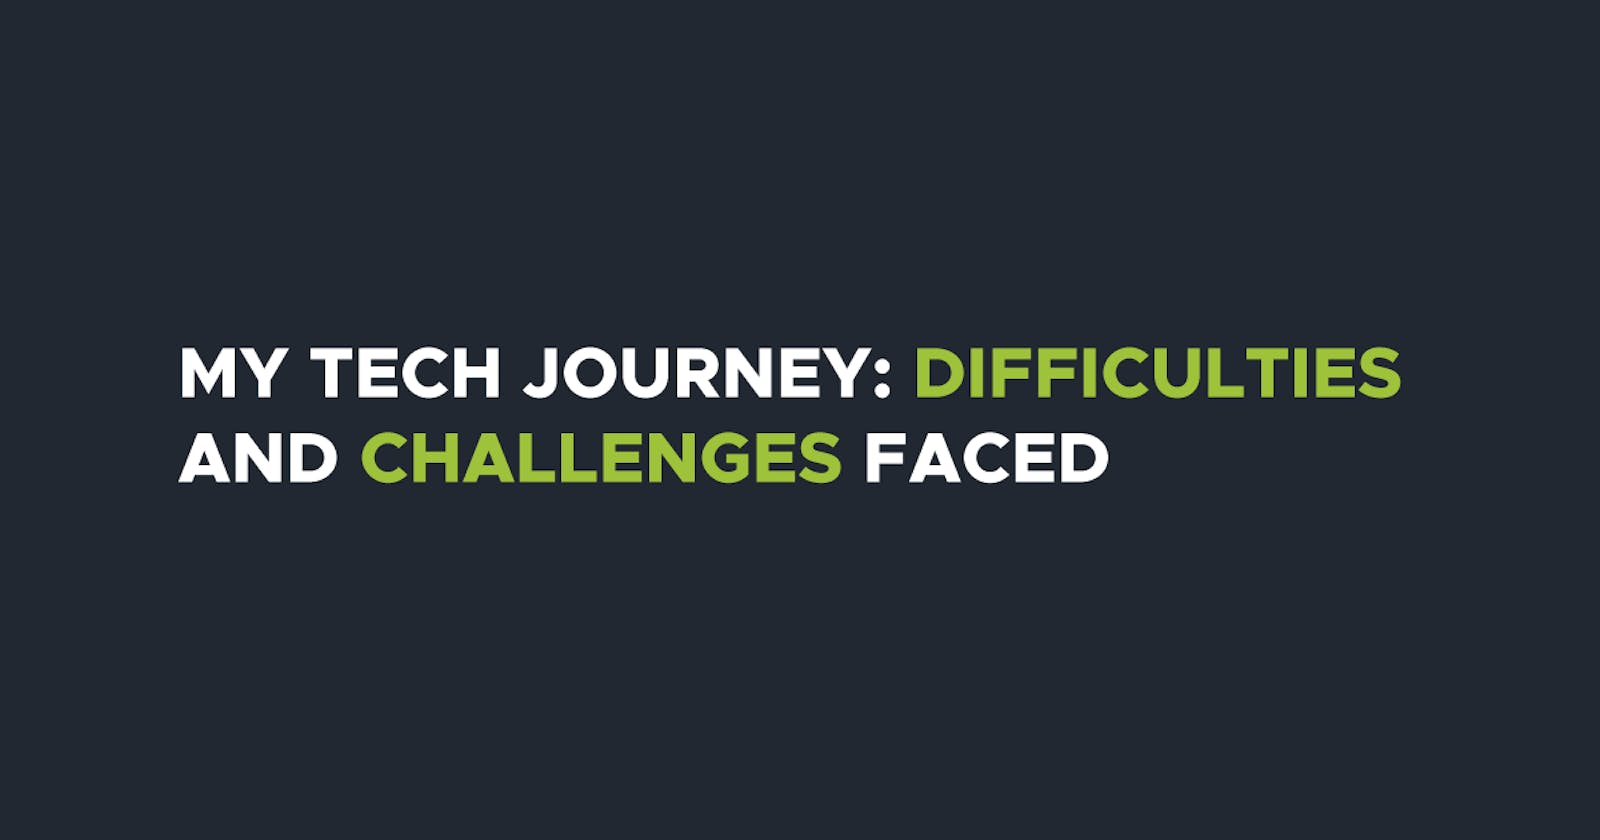 My Tech Journey: Difficulties and challenges faced